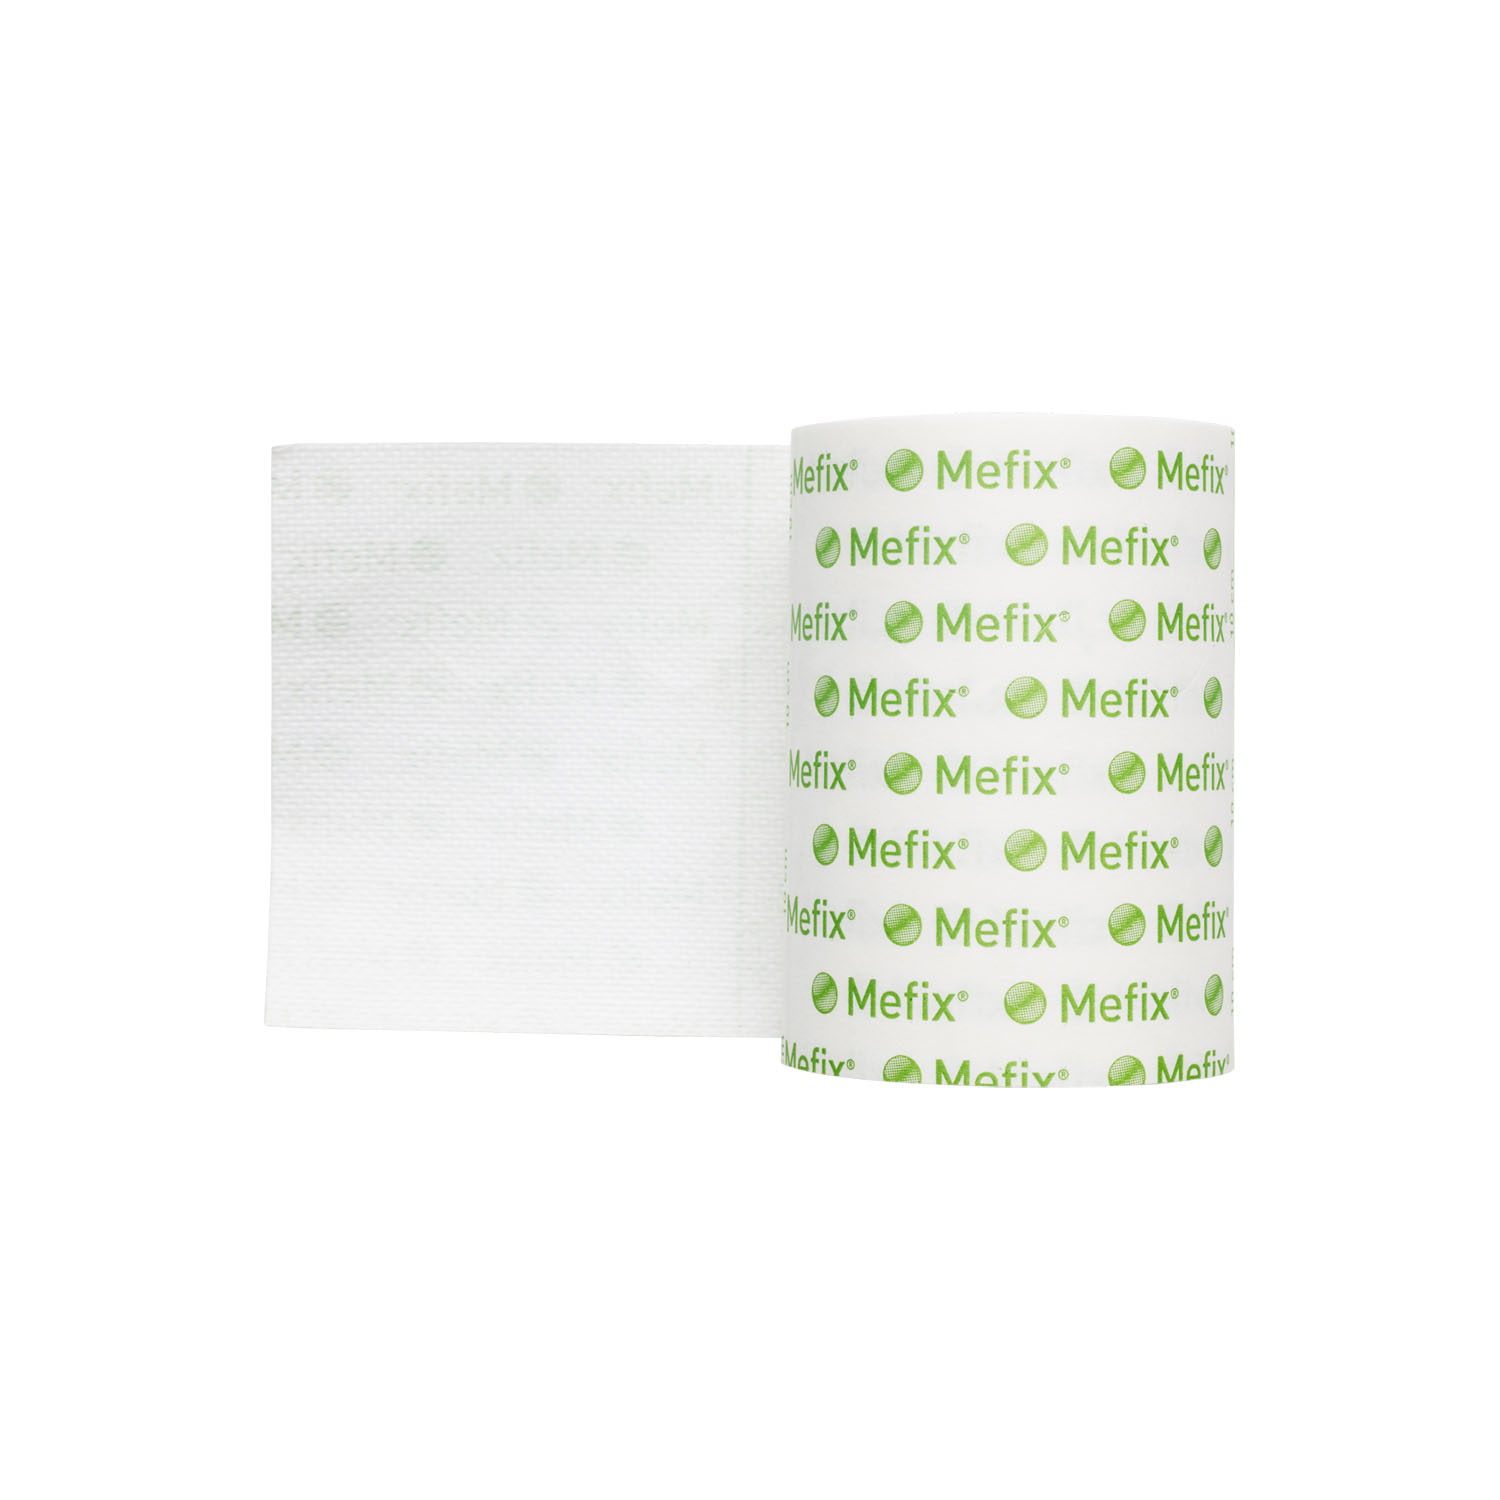 MOLNLYCKE WOUND MANAGEMENT - MEFIX : 311099 EA $12.19 Stocked